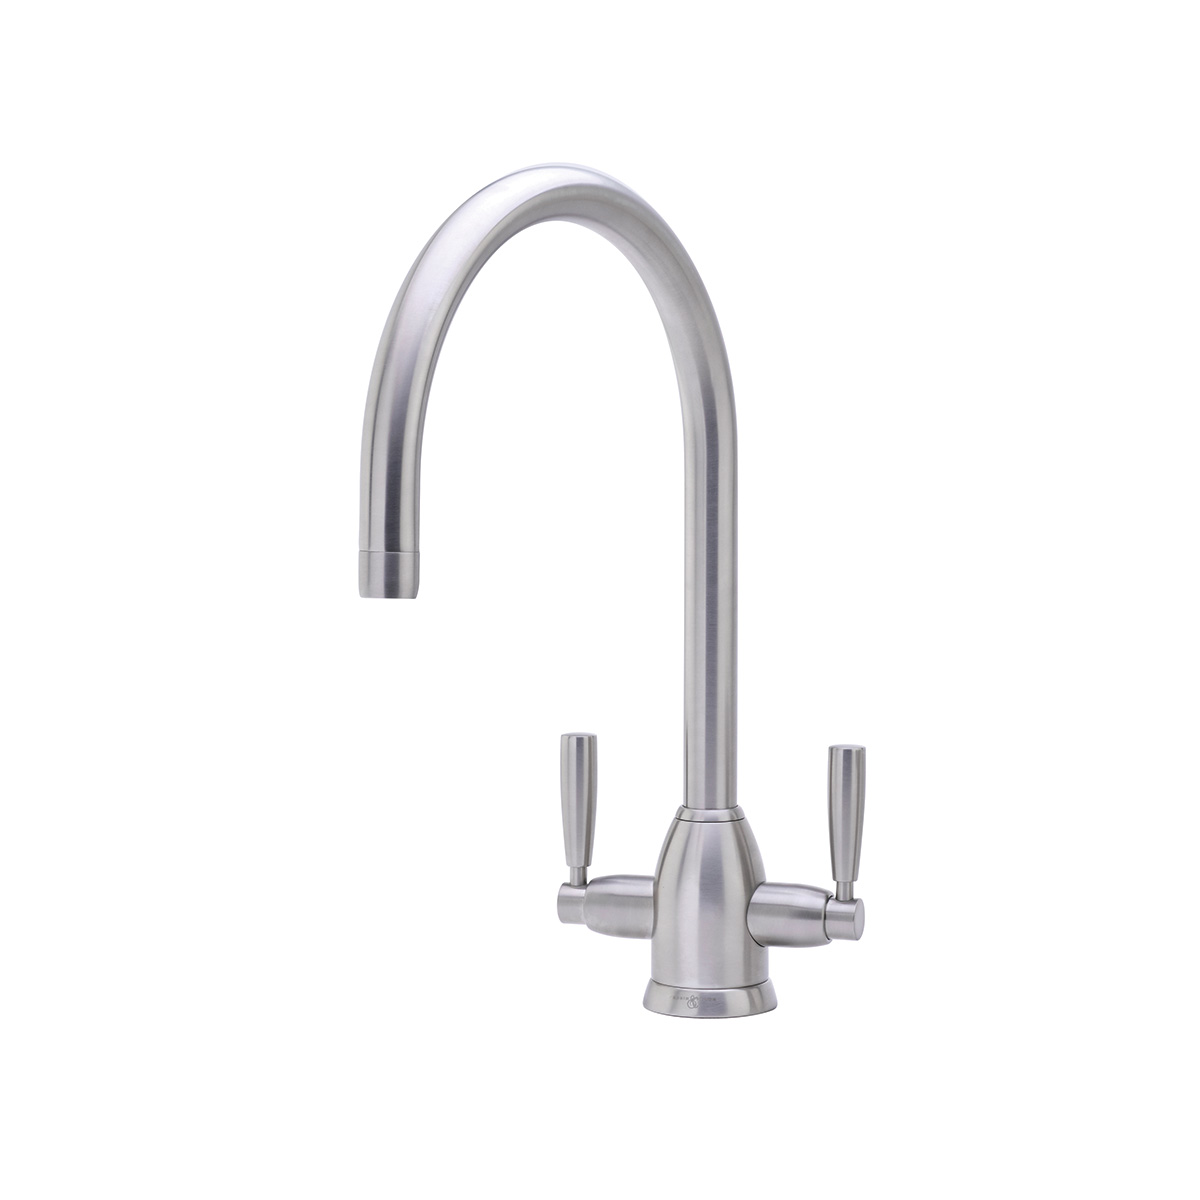 Shaws by Perrin & Rowe Silverdale kitchen mixer in Pewter. Oberon style kitchen mixer AUSH.4861. Distributed in Australia by Luxe by Design, Brisbane.